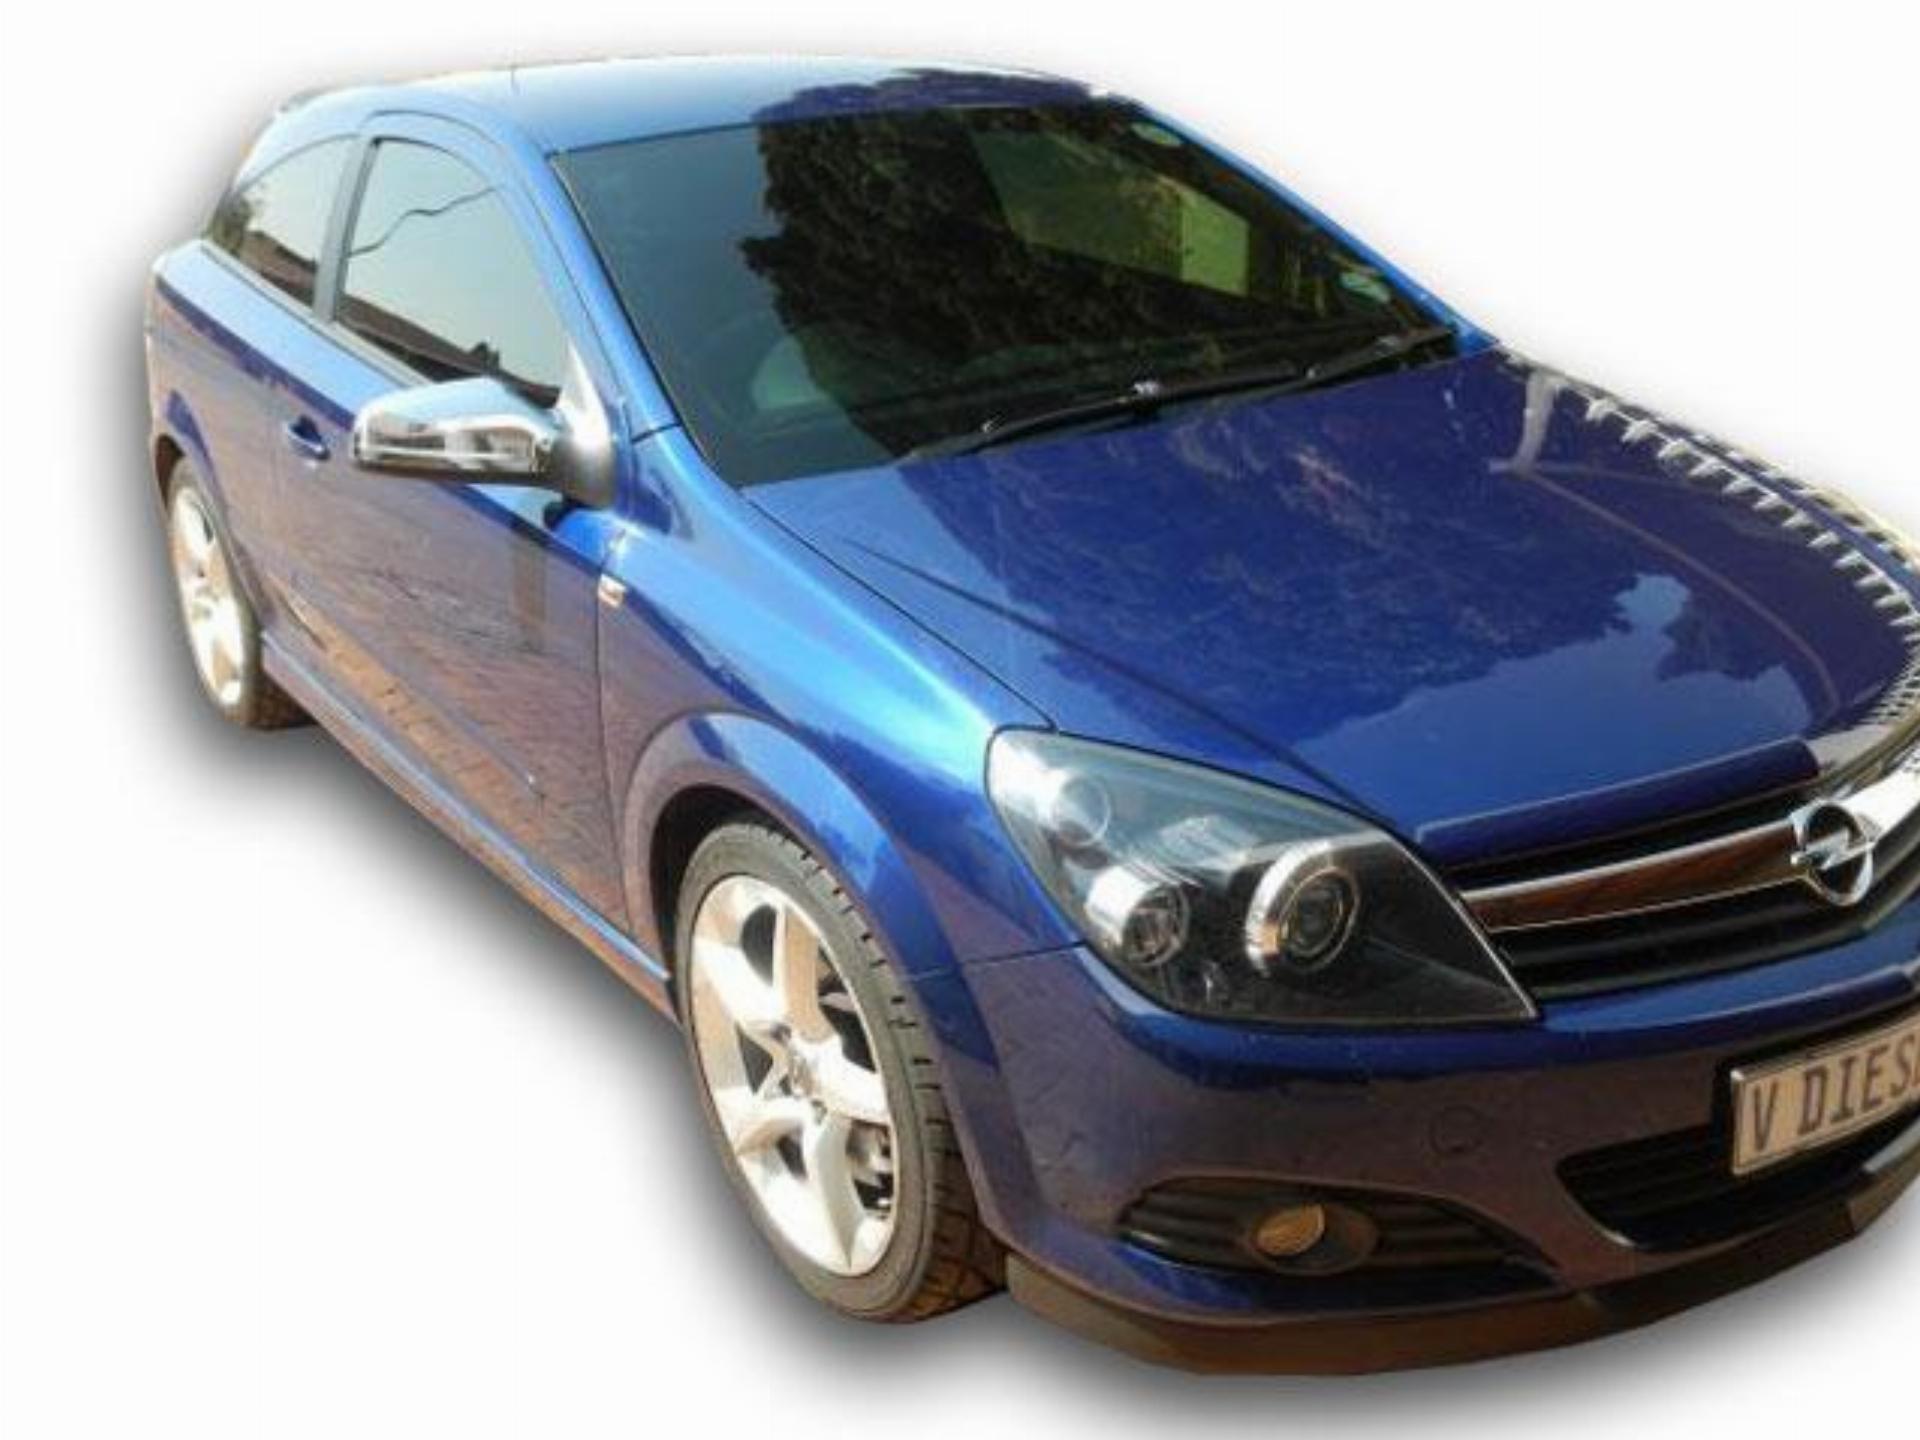 Used Opel Astra GTC 1.9 2007 on auction - PV1000740